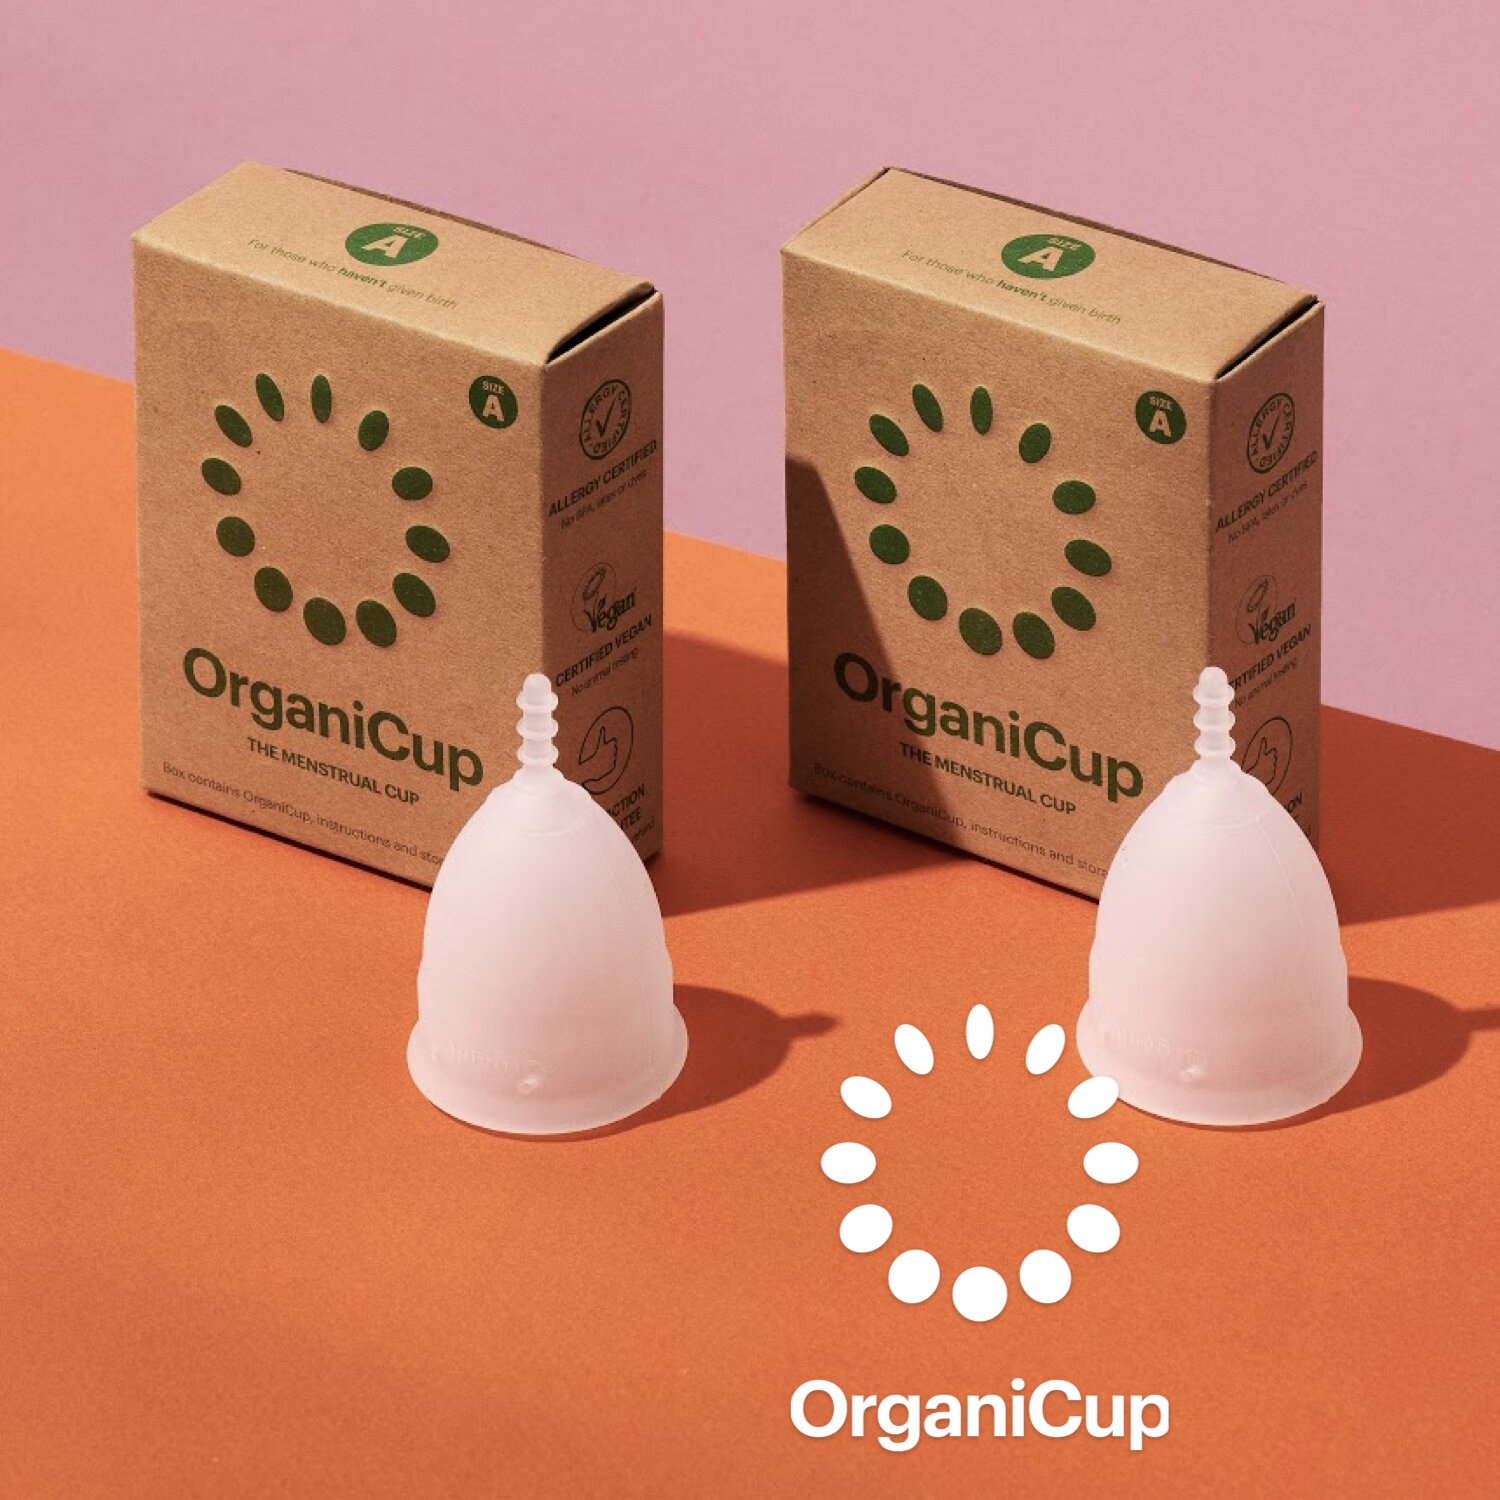 ORGANICUP MENTRUAL CUP REVIEW